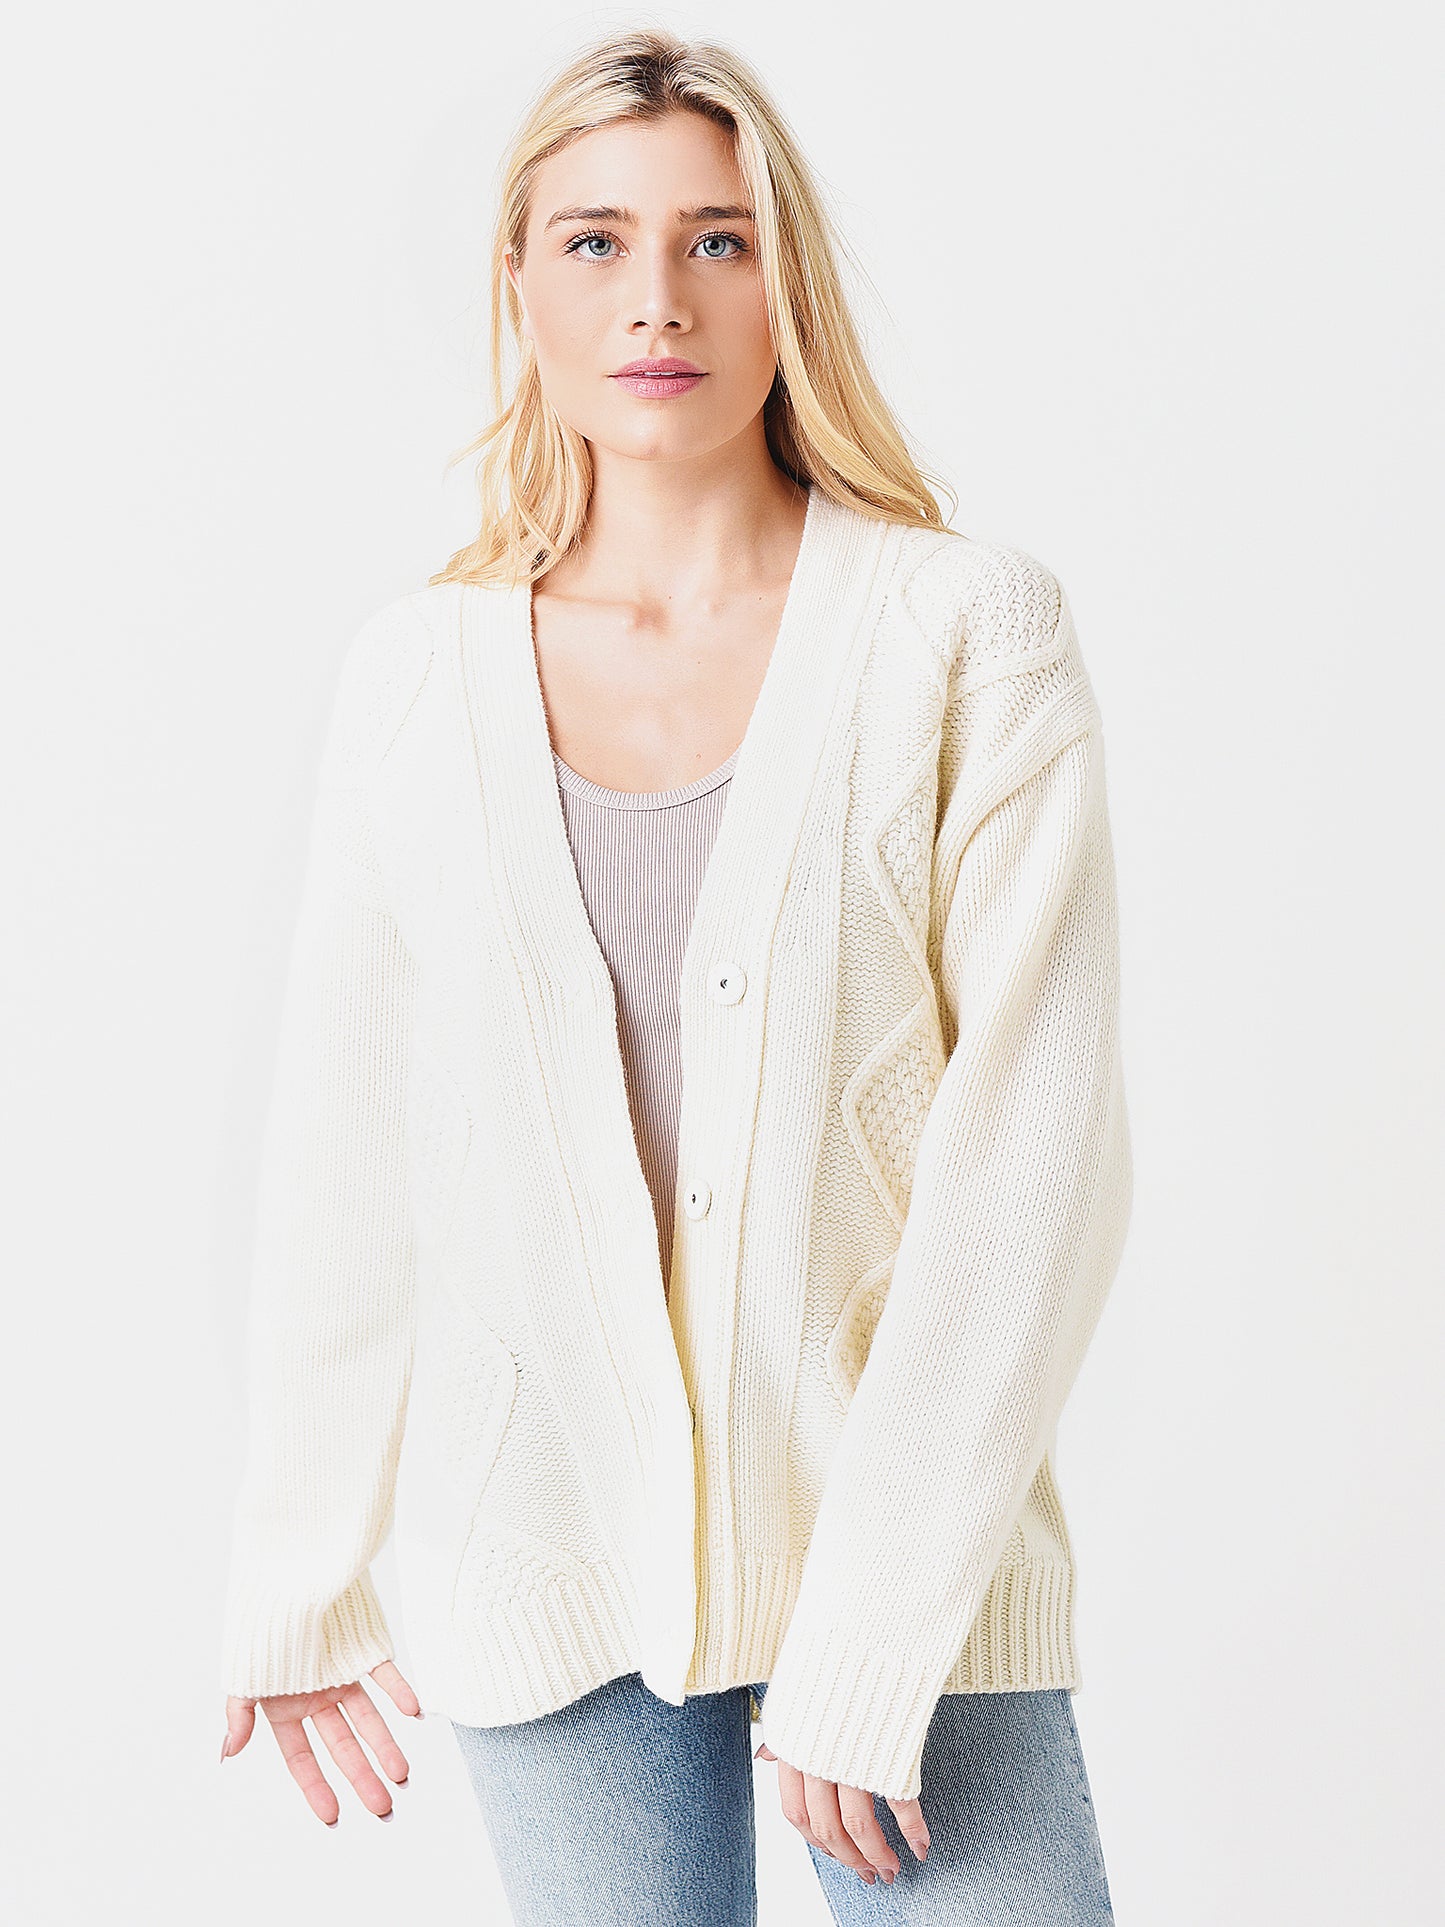 ATM Women's Cable Knit Cardigan